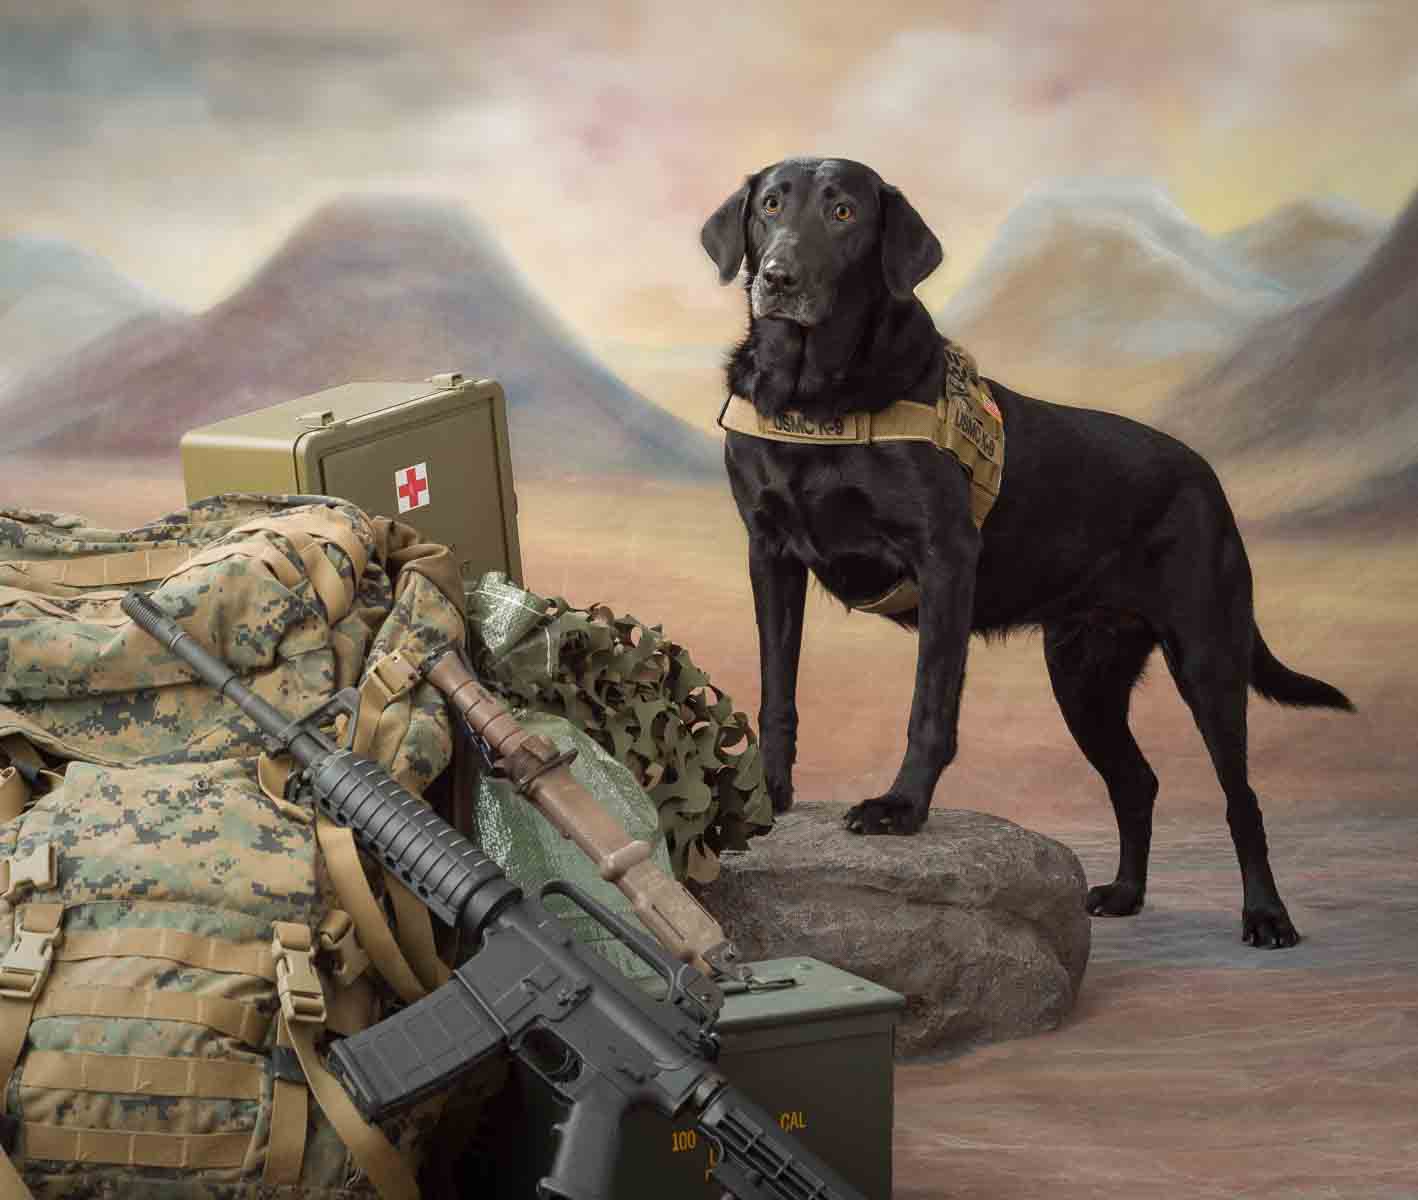 A black dog with a yellow collar standing next to a gun.